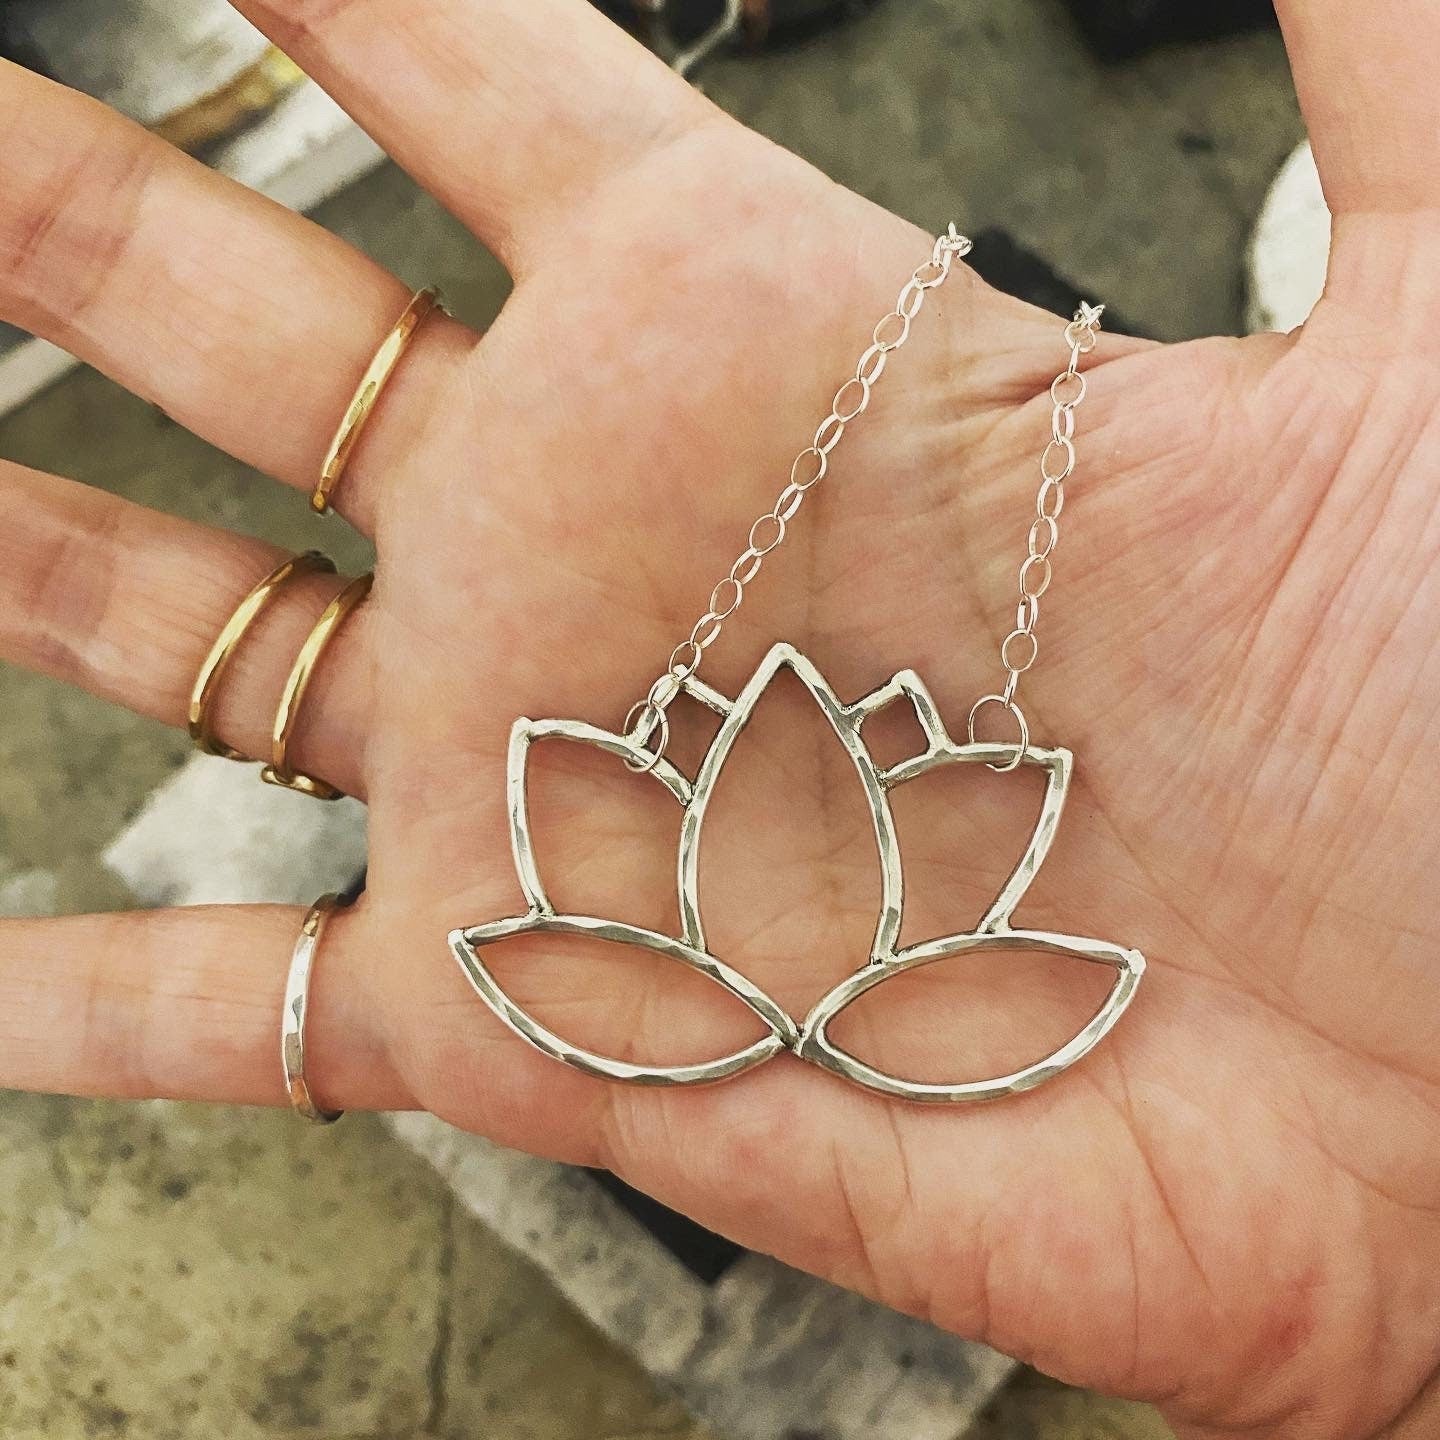 Sterling Lotus Flower Necklace - Handmade Lotus Pendant - Hammered Lotus Necklace - Lotus Statement Necklace - Flower Jewelry - Healing Gift